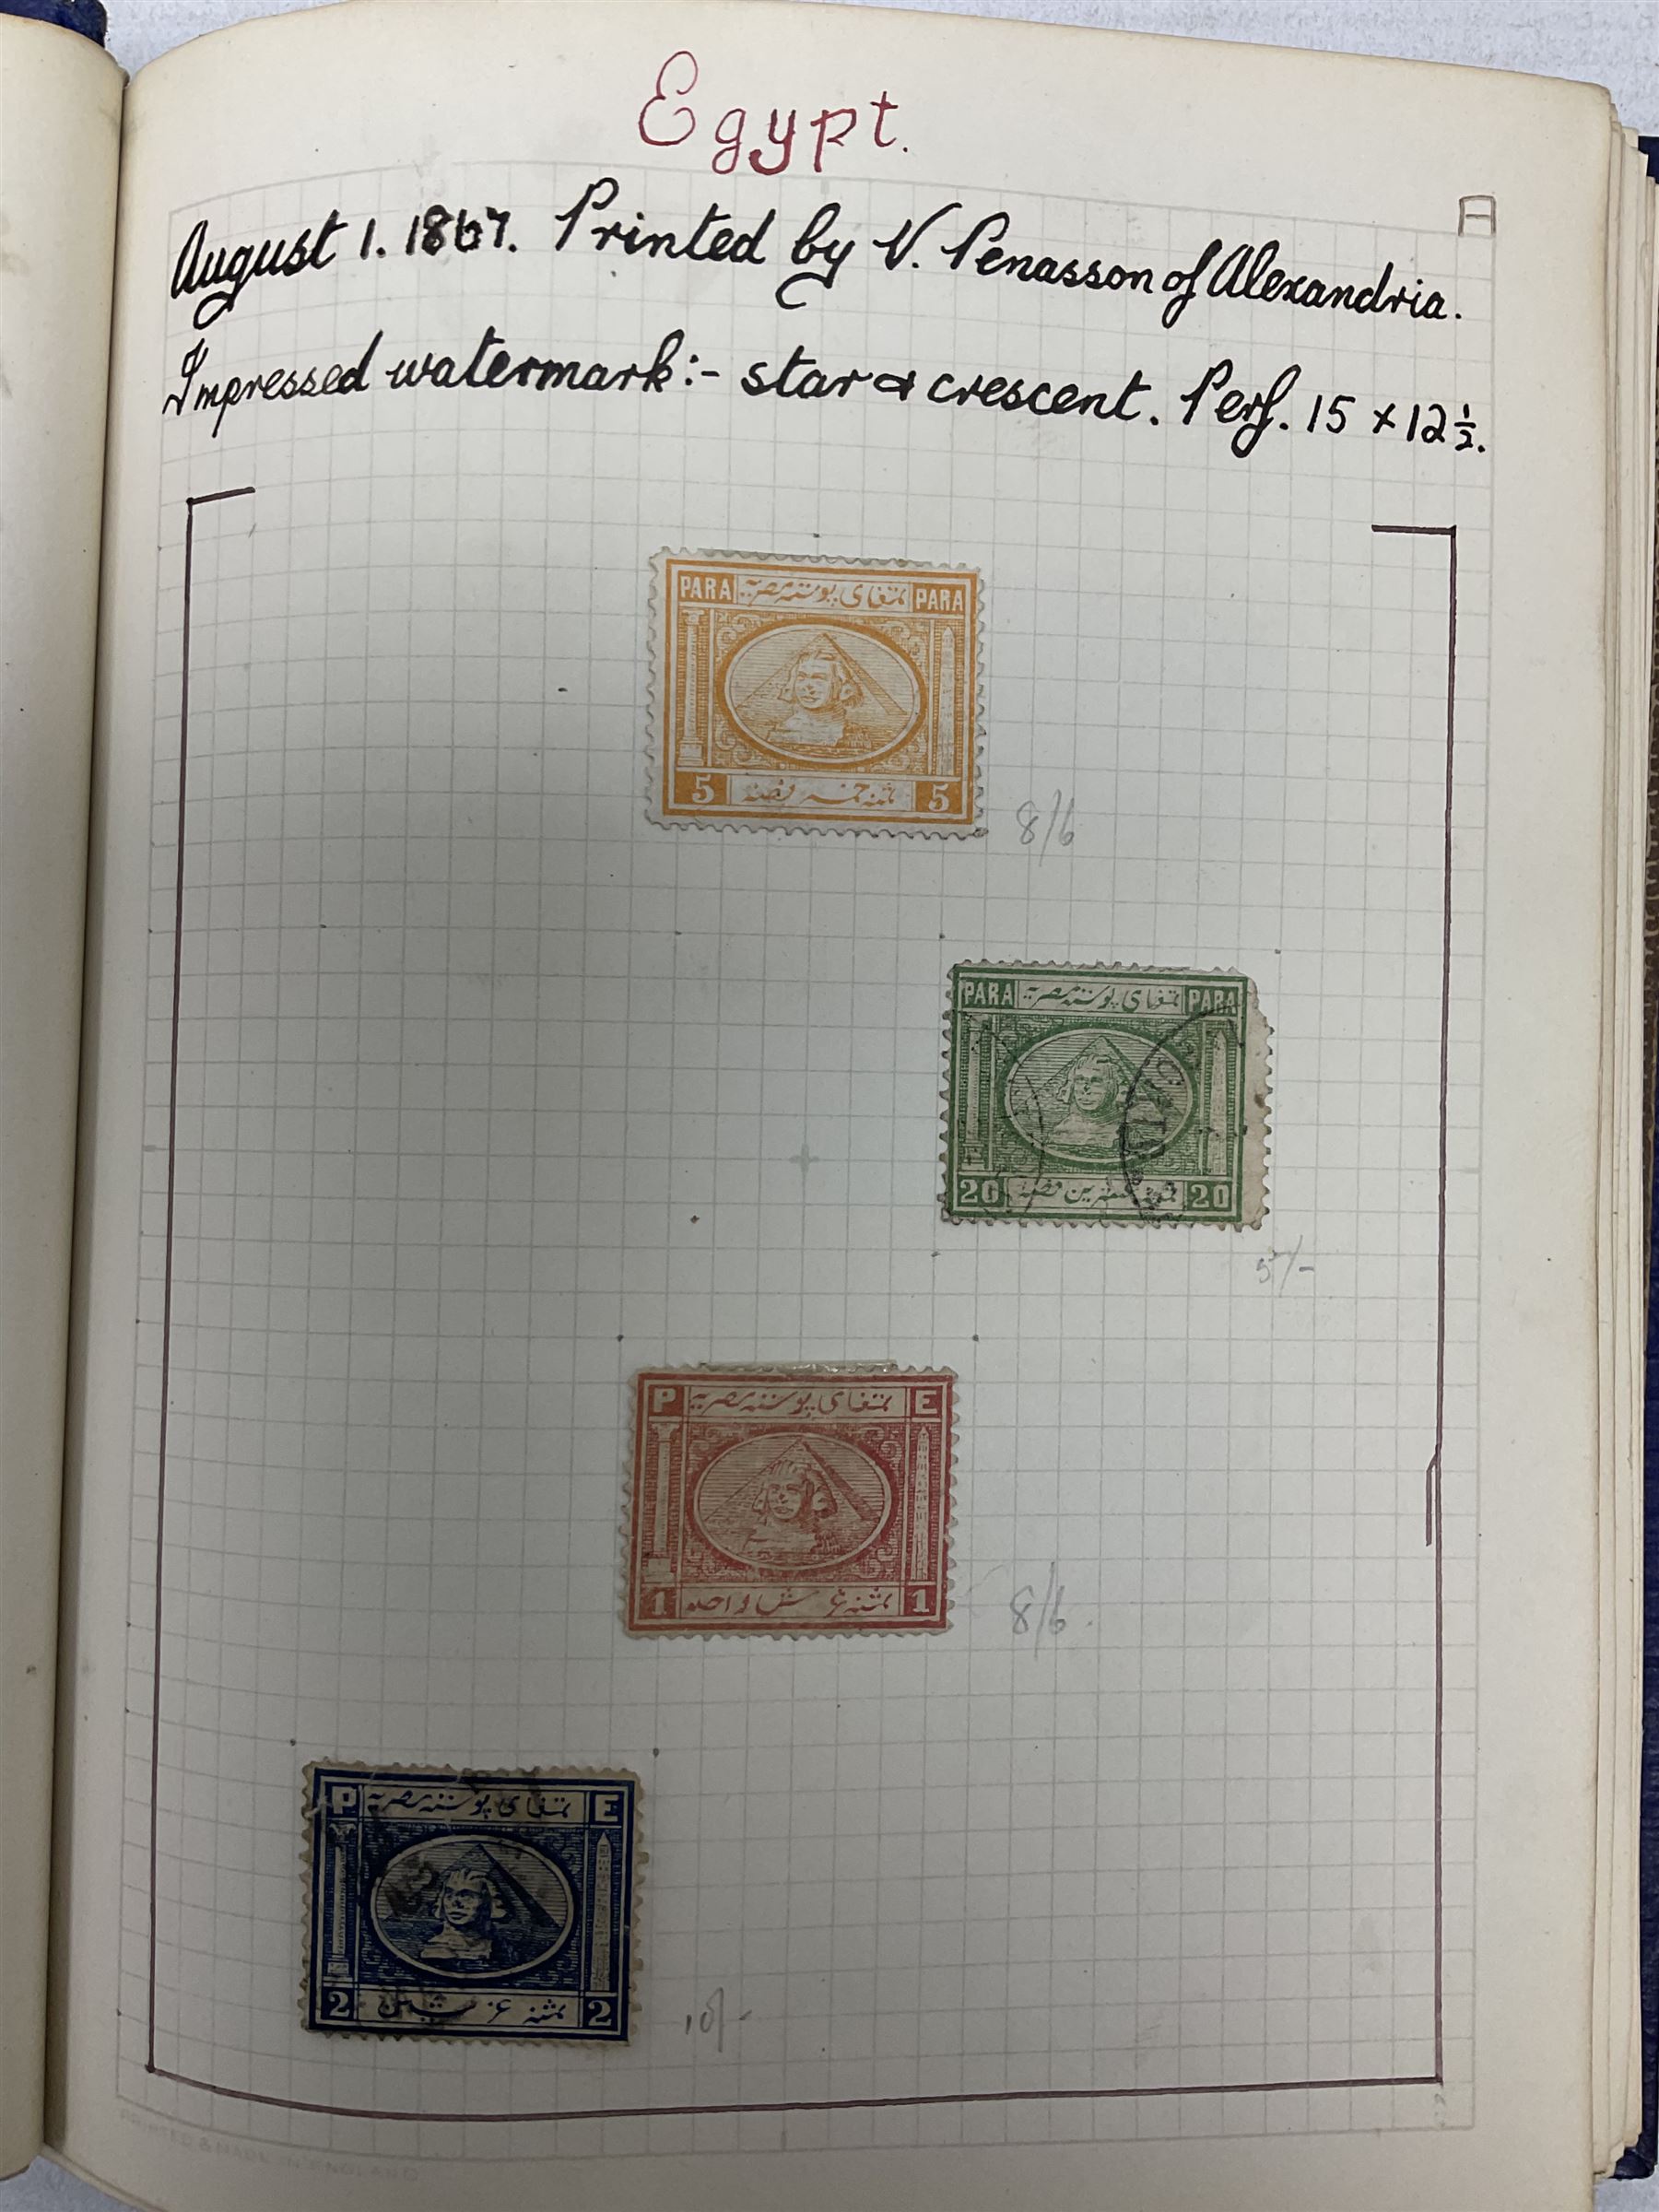 Egypt 1866 and later stamps - Image 62 of 761